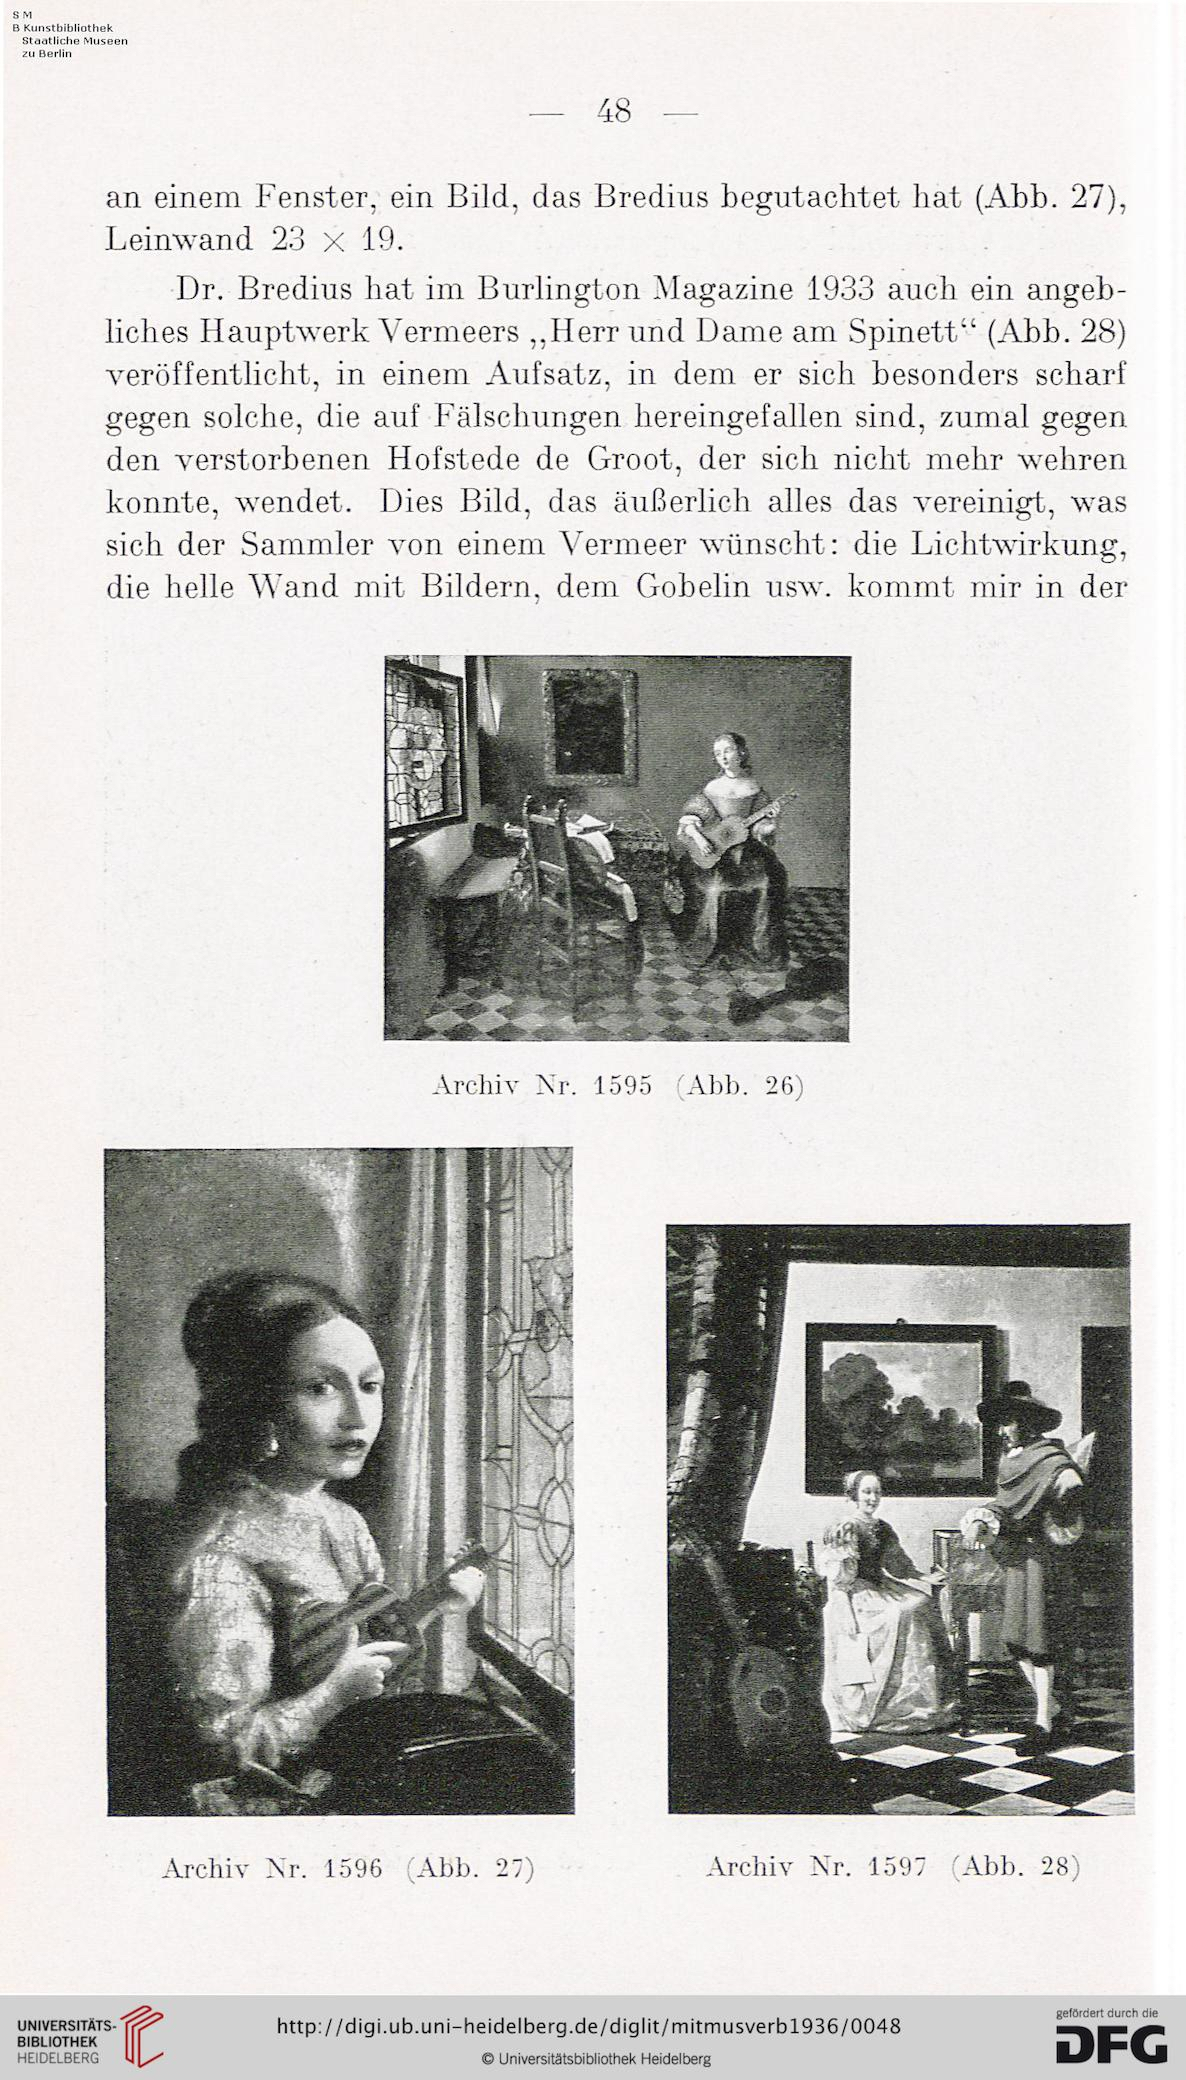 Excerpt from the “Mitteilungen des Museums-Verbandes, i.e. the Communications from the Museums Association, printed as a manuscript and issued in February 1936. The forgery at the bottom right, “Gentleman and Lady at the Spinet” in the style of Jan Vermeer, was probably made by the Vermeer forger Han van Meegeren. It is now in the Rijksdienst voor het Cultureel Erfgoed, Amersfoort/Amsterdam/Rijswijk (Instituut Collectie Nederland).